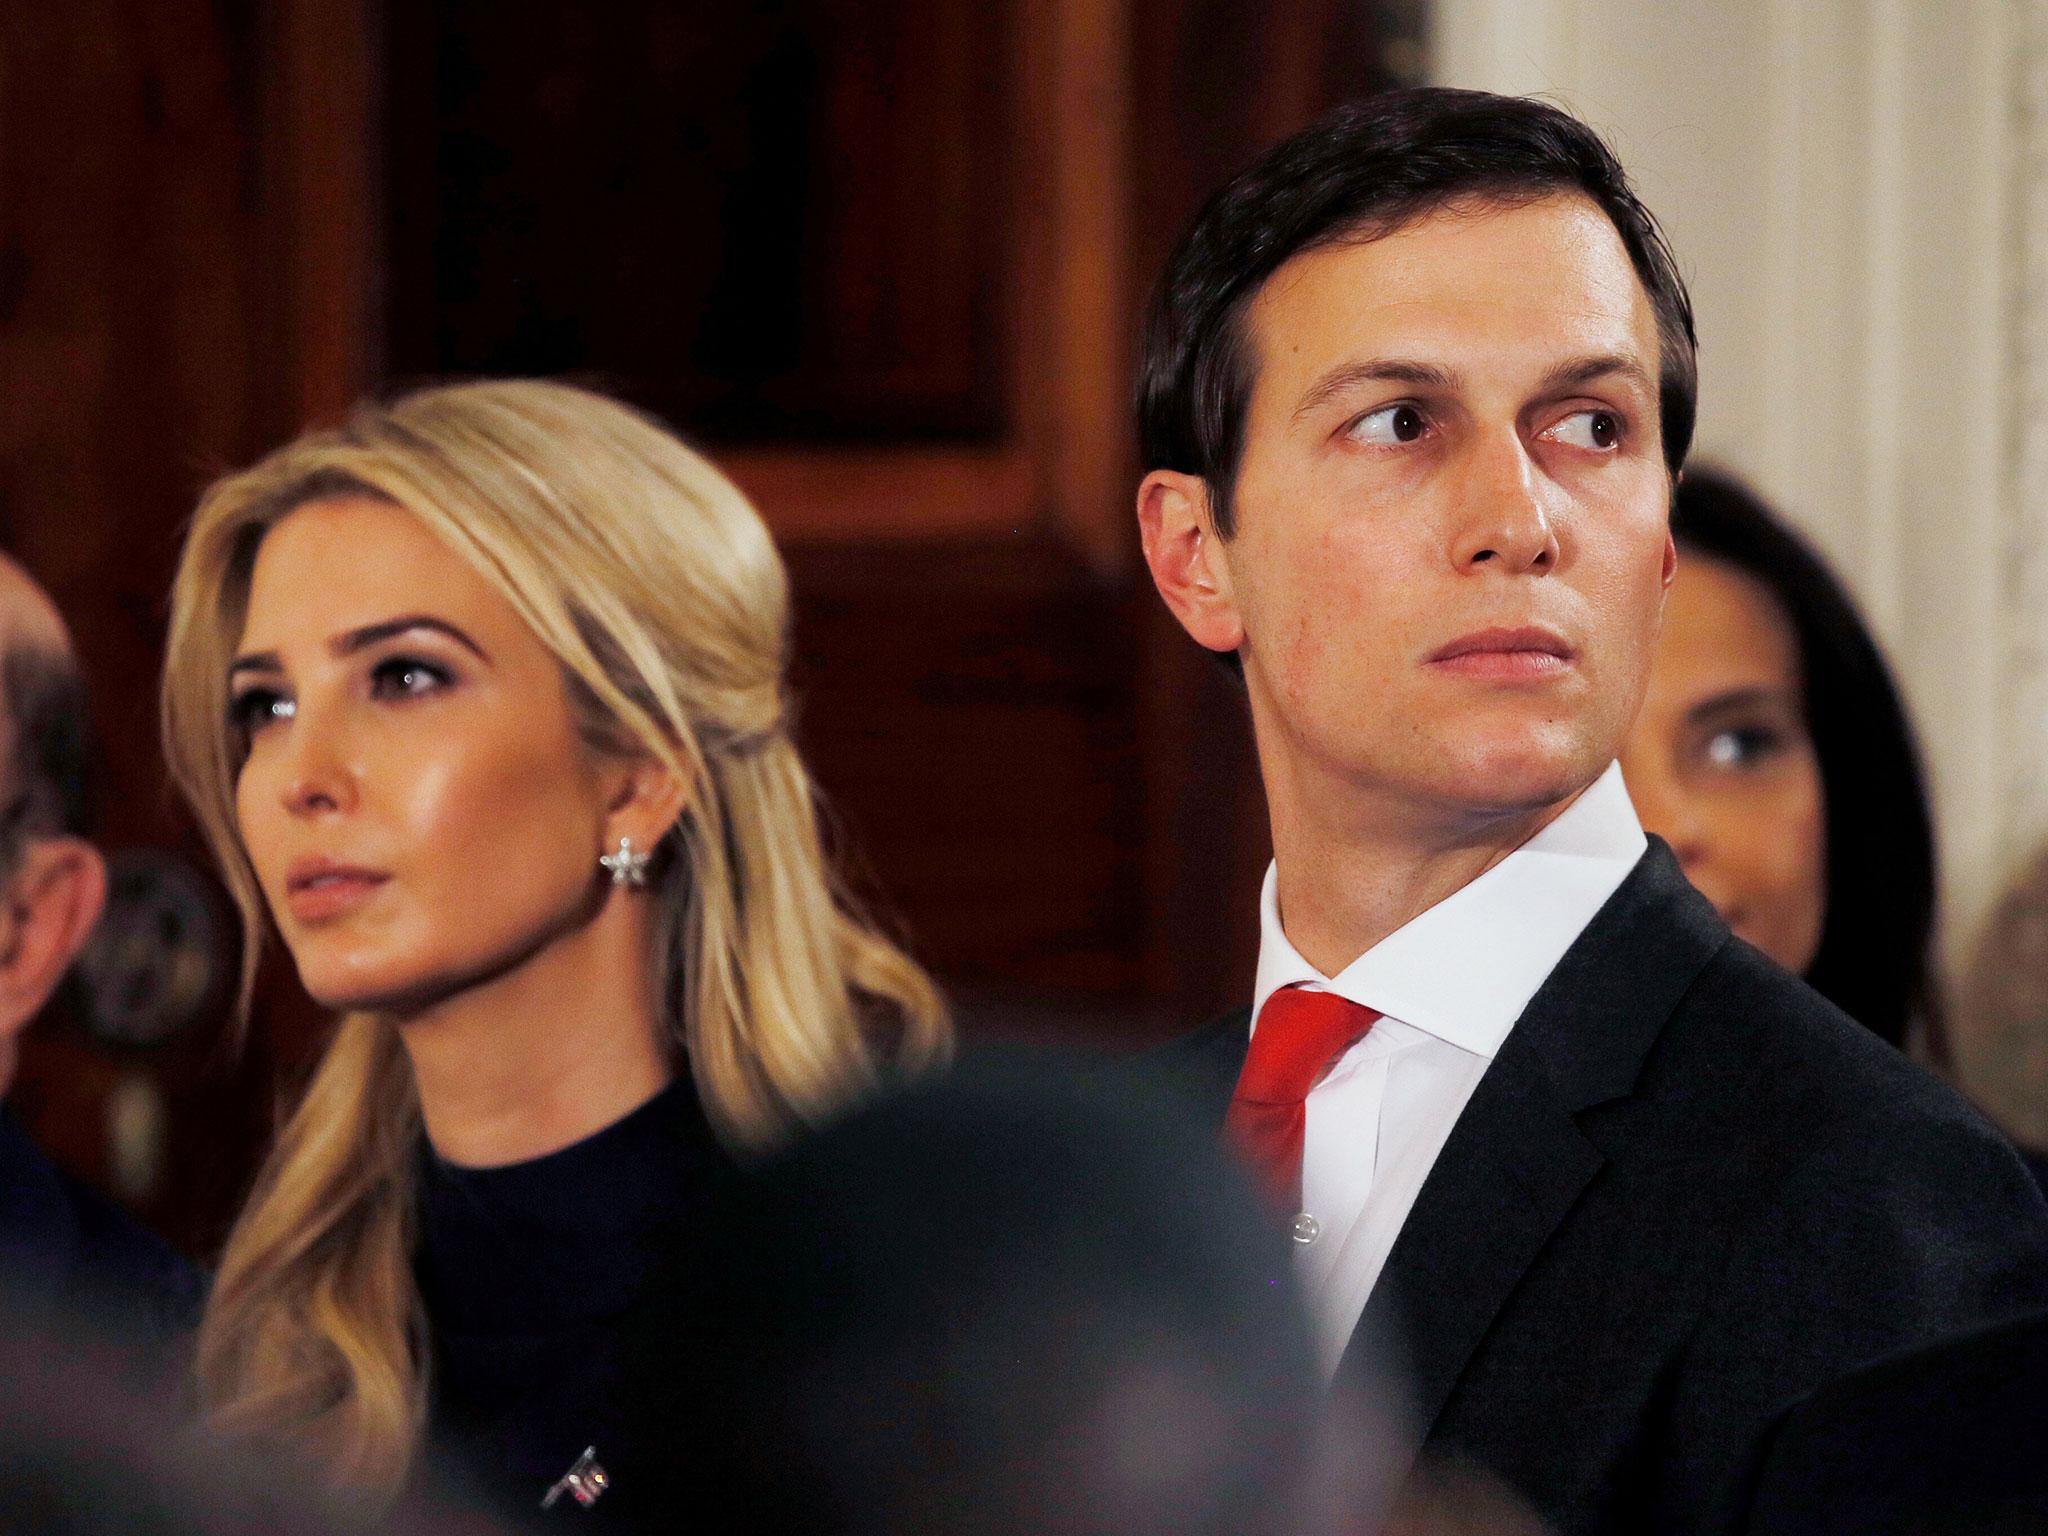 Mr Kushner reportedly did not see the article himself